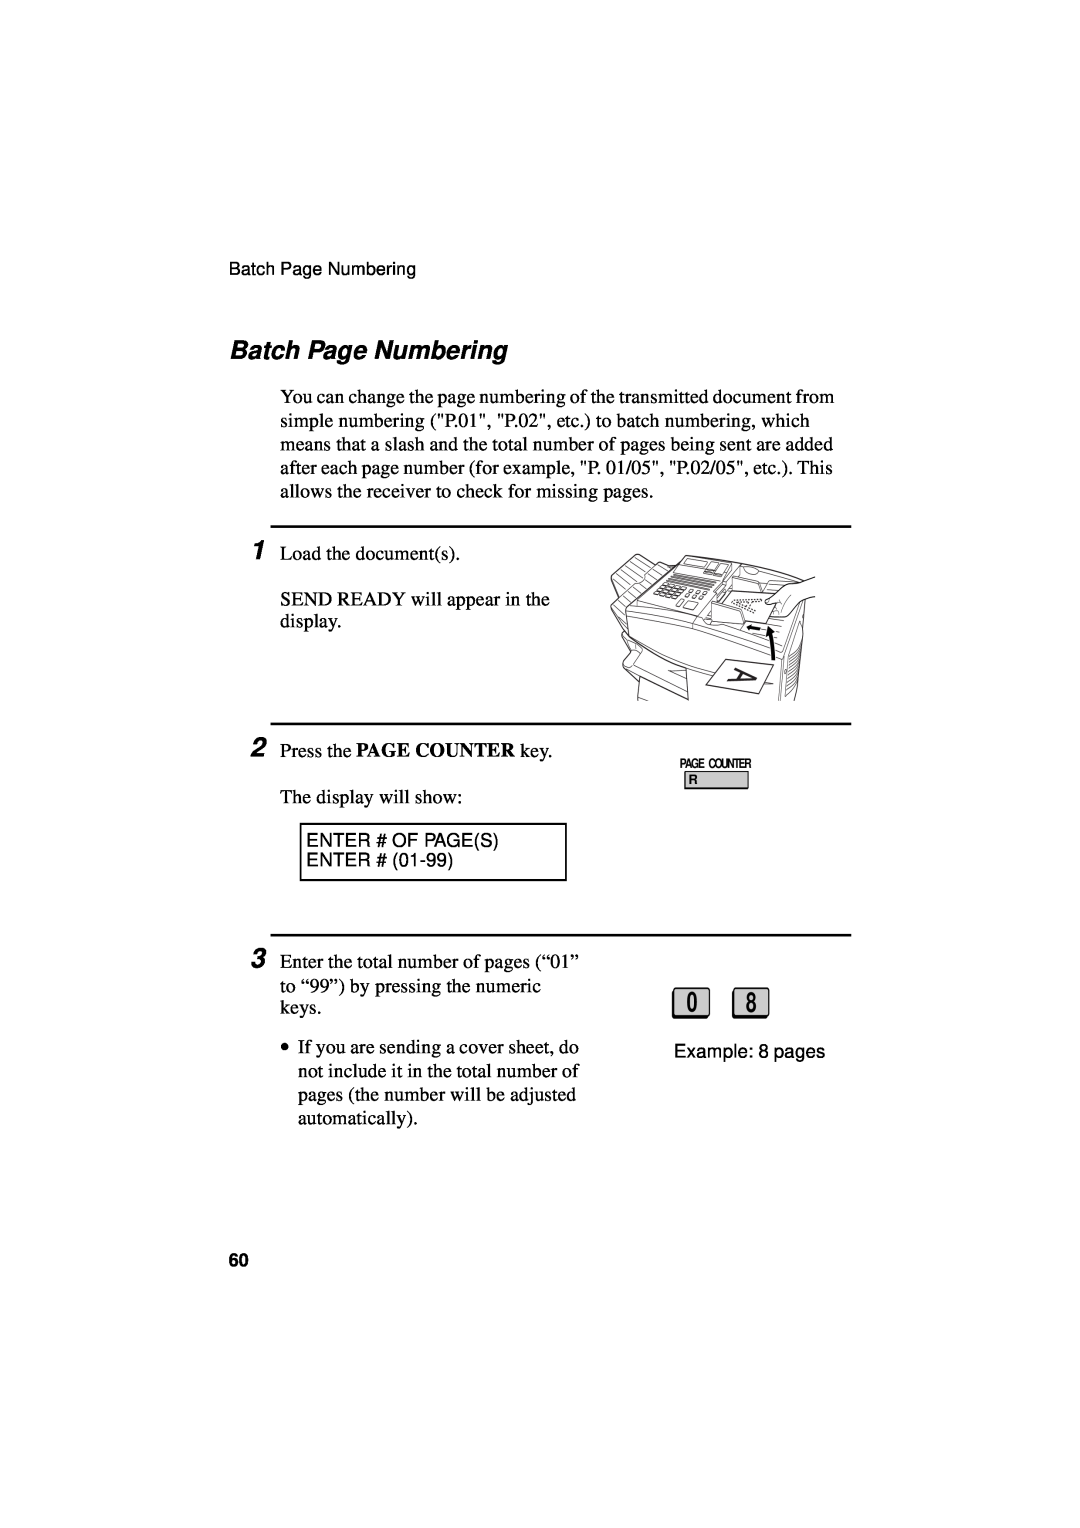 Sharp FO-5550, FO-5700, FO-4700 operation manual Batch Page Numbering, Enter # Of Pages Enter #, Example 8 pages 